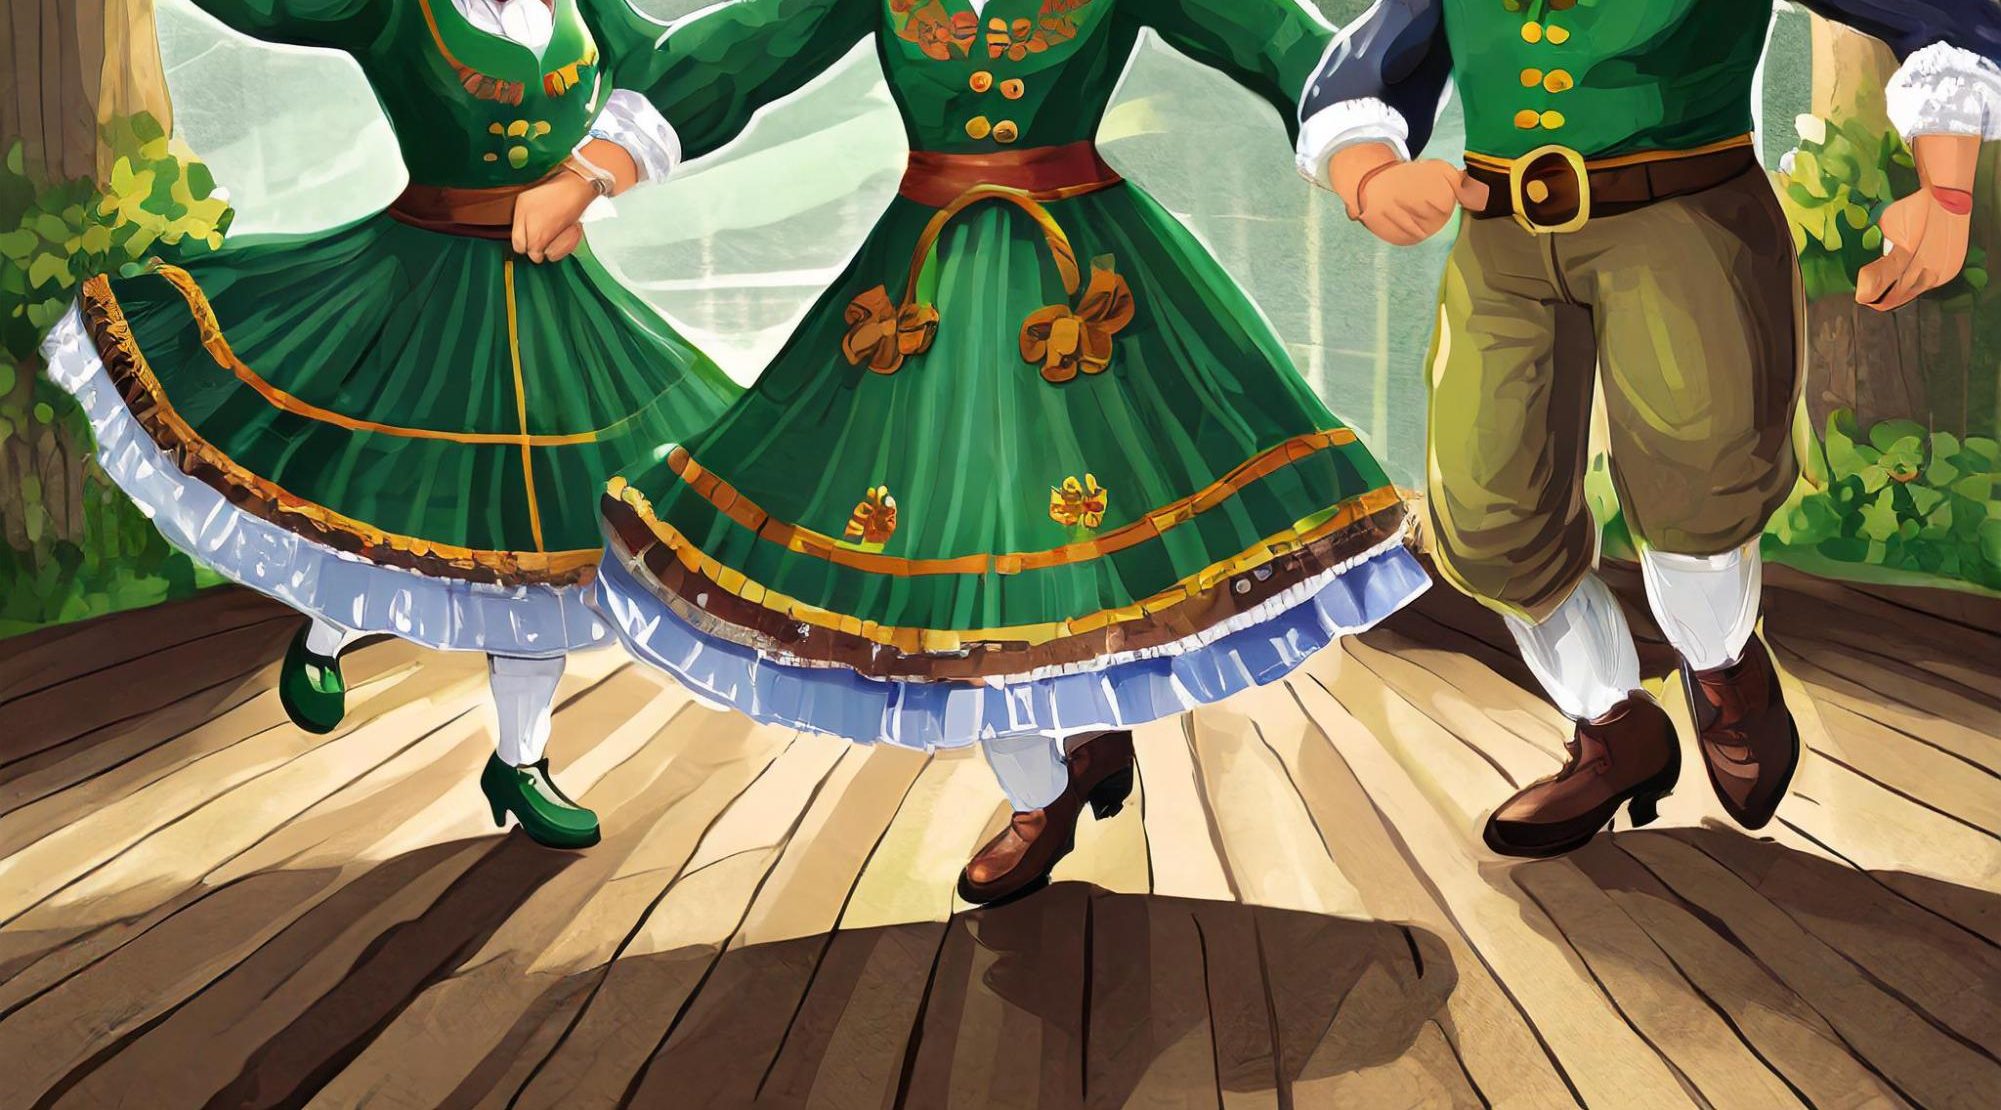 While known for being difficult, an Irish Jig serves as quite the workout, bound to get your calves burning.